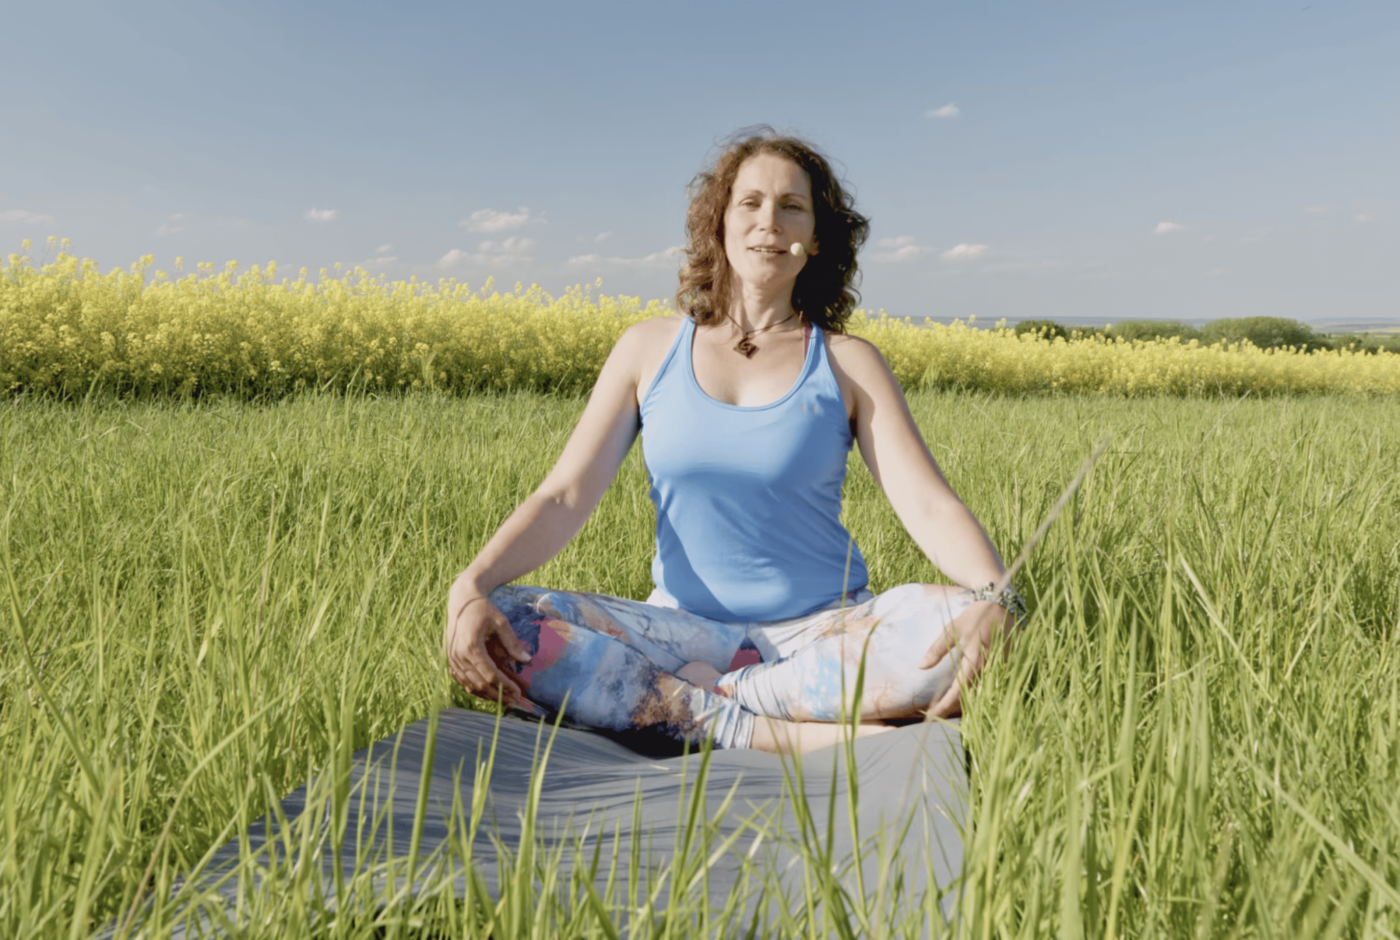 Yoga with Nora - Hörselberg-Hainich, Germany